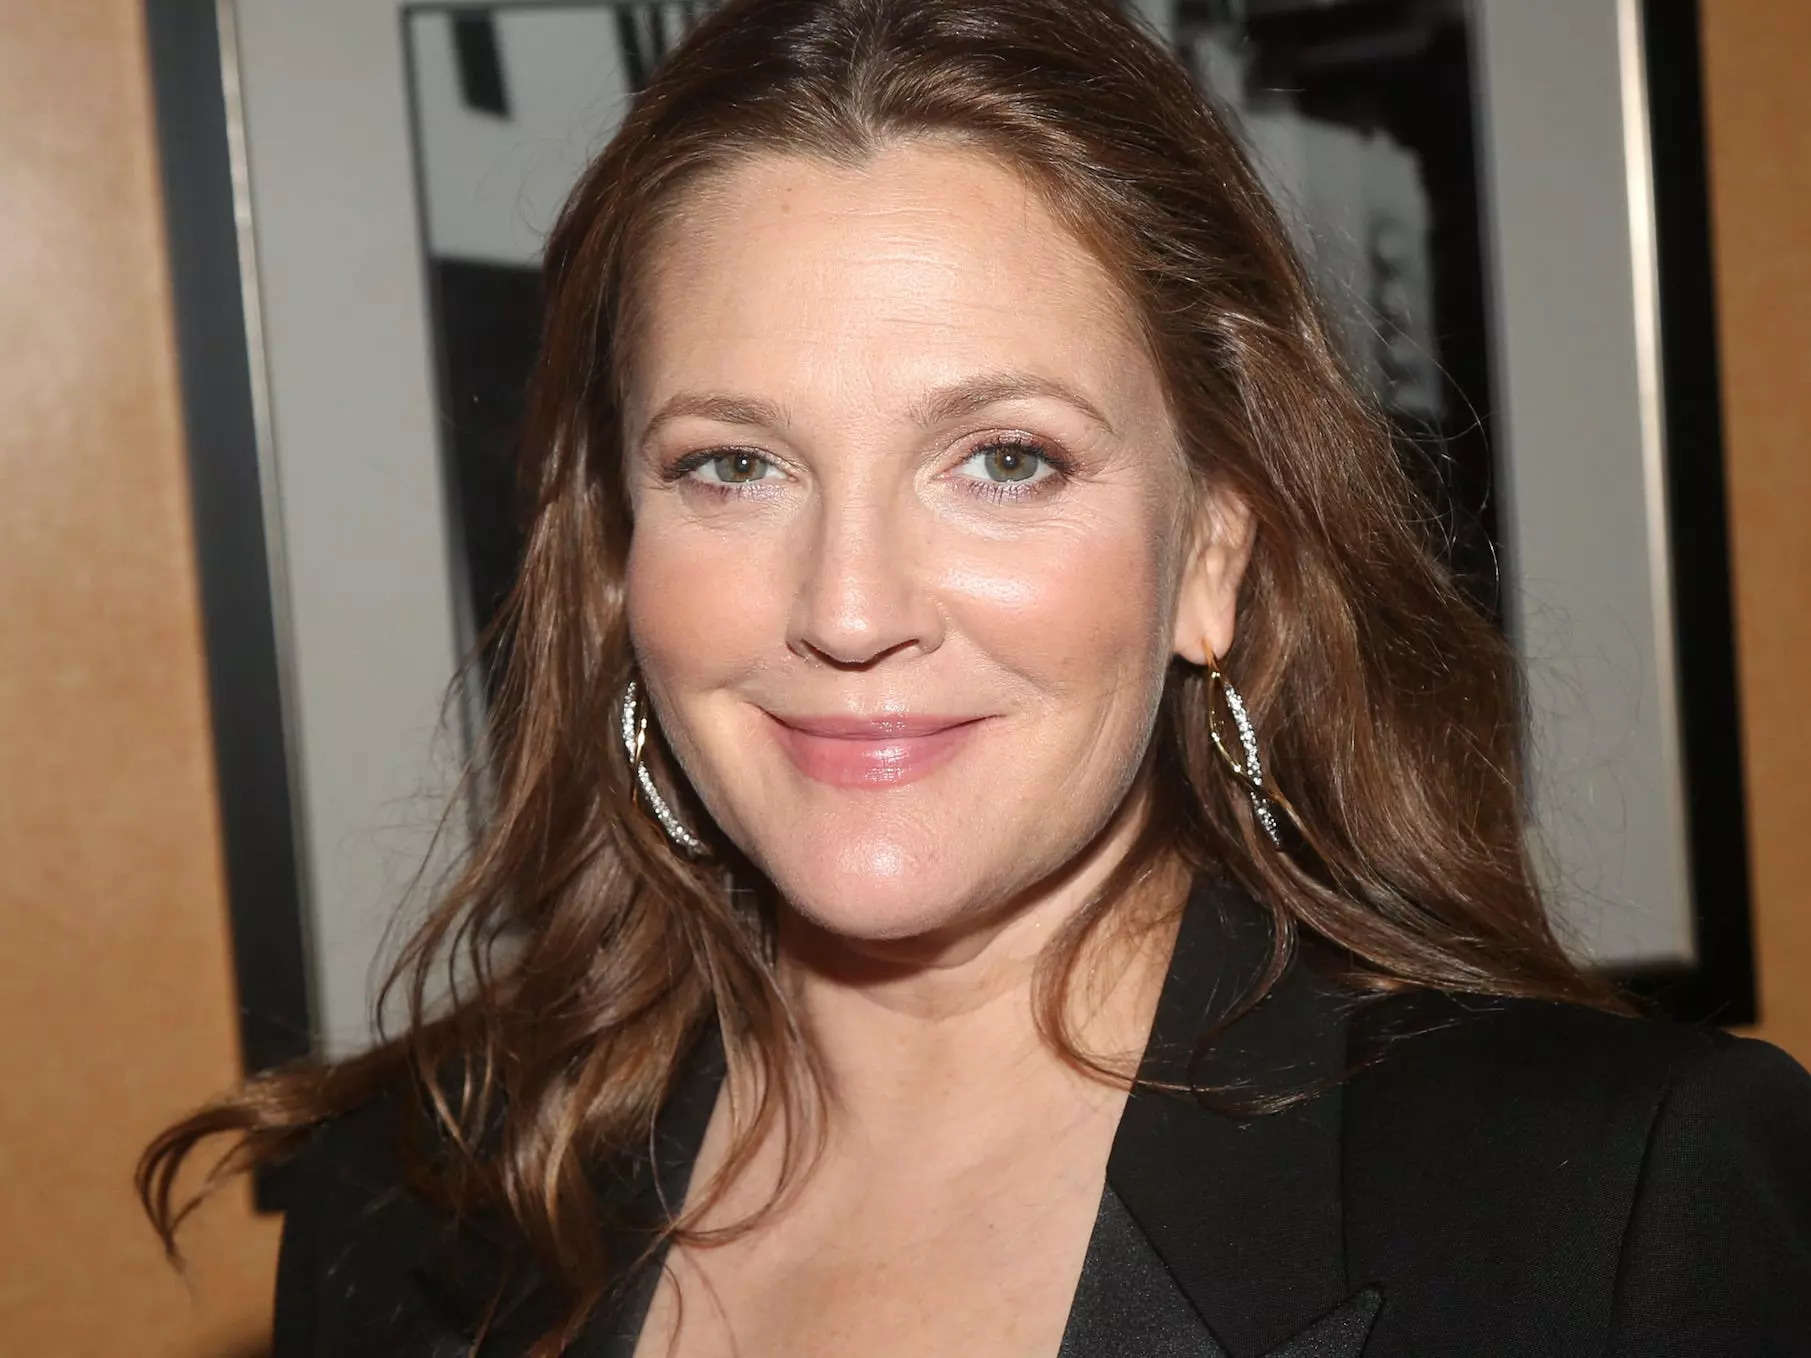 Drew Barrymore Says She Can Go Years Without Having Sex Business Insider India 